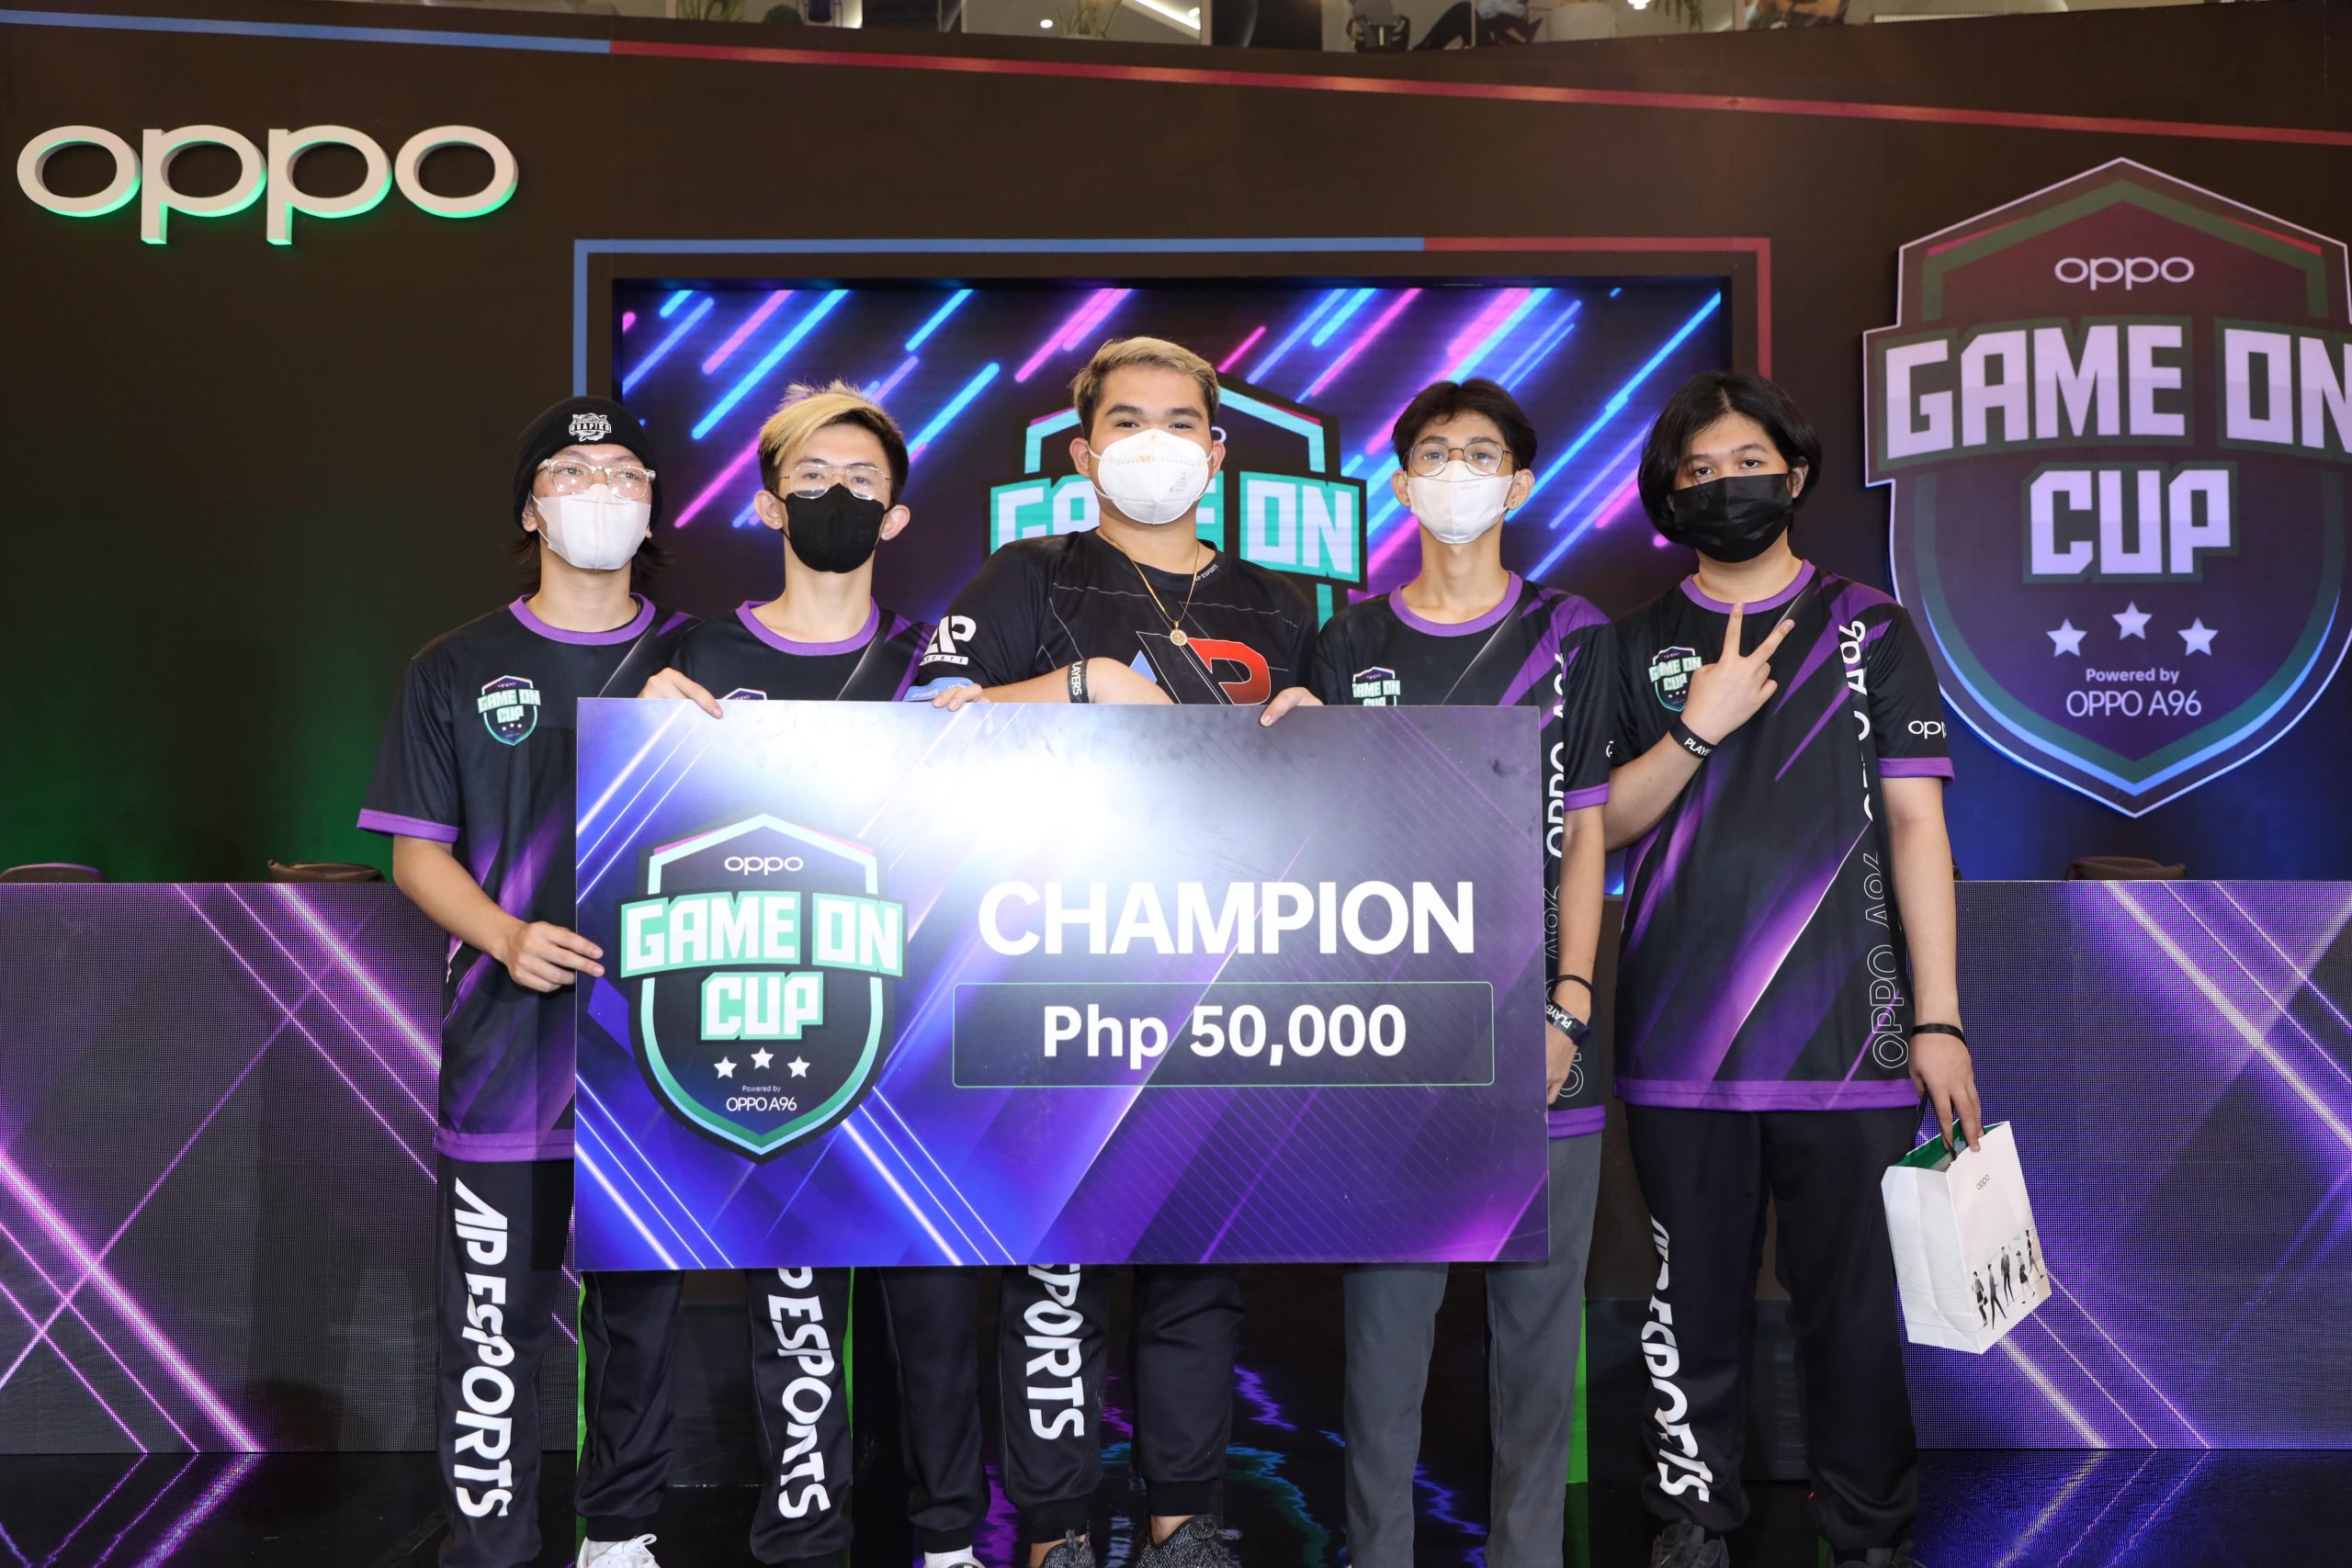 OPPO and Mineski Philippines crown their new OPPO Game On Cup Champion